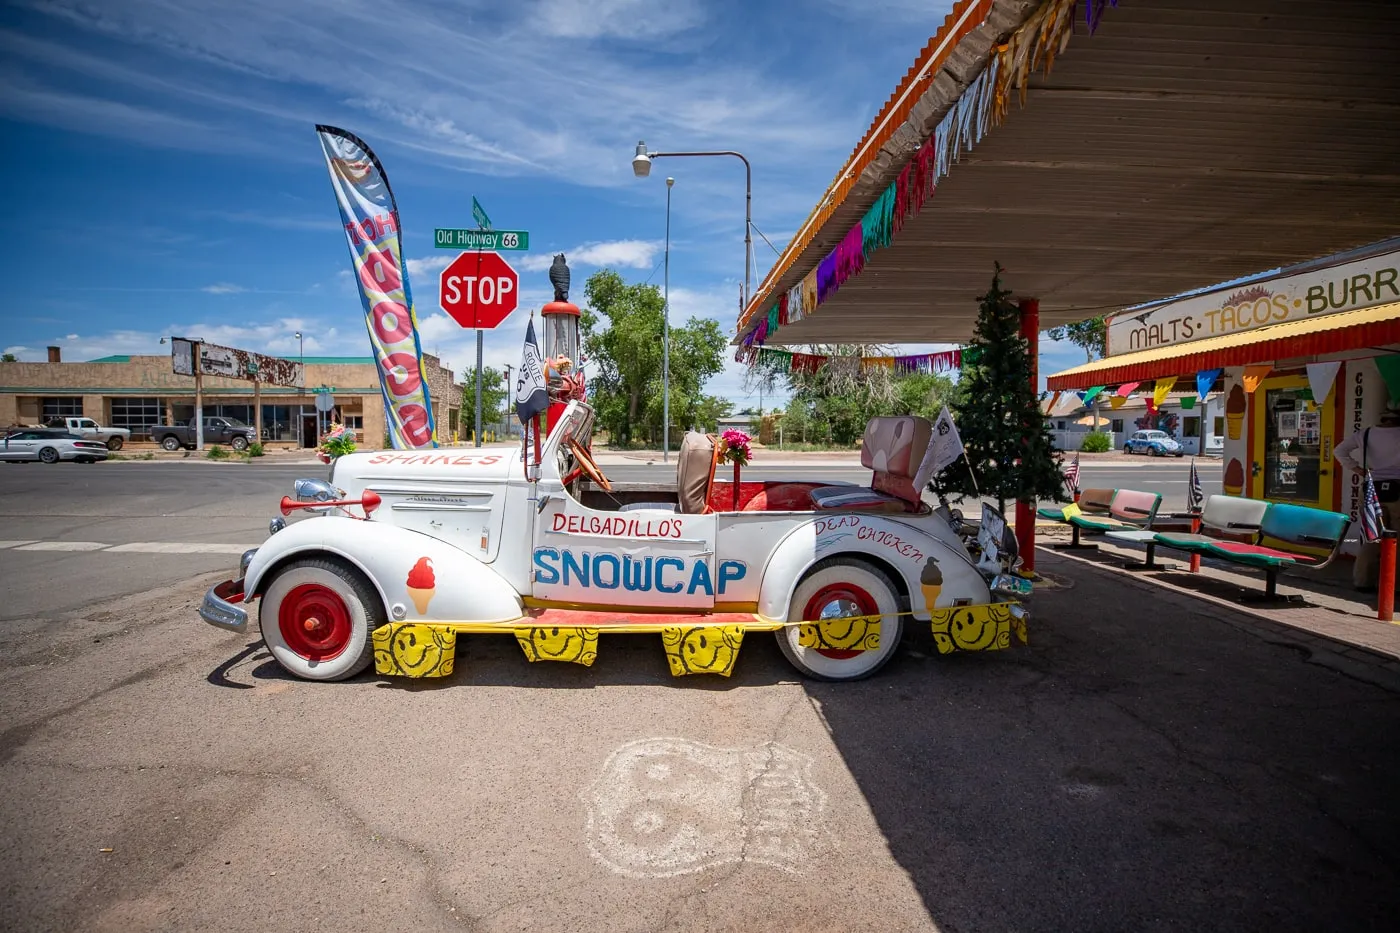 Old-Fashioned Car at Delgadillo’s Snow Cap in Seligman, Arizona - Route 66 restaurant and Drive-In Diner